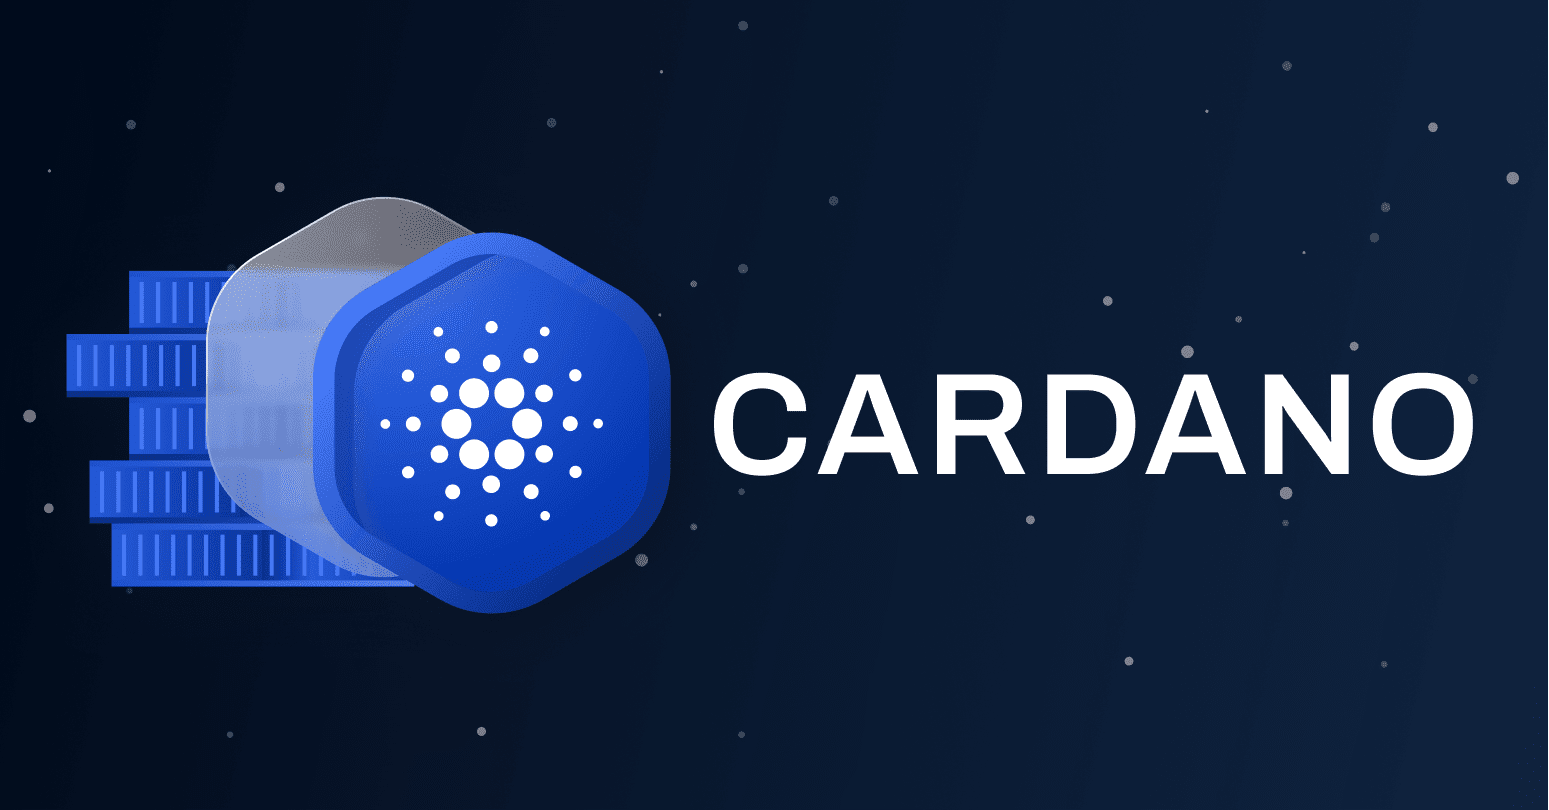 Why Is Cardano Experiencing a Market Sell-off? Hoskinson Sheds His Insights